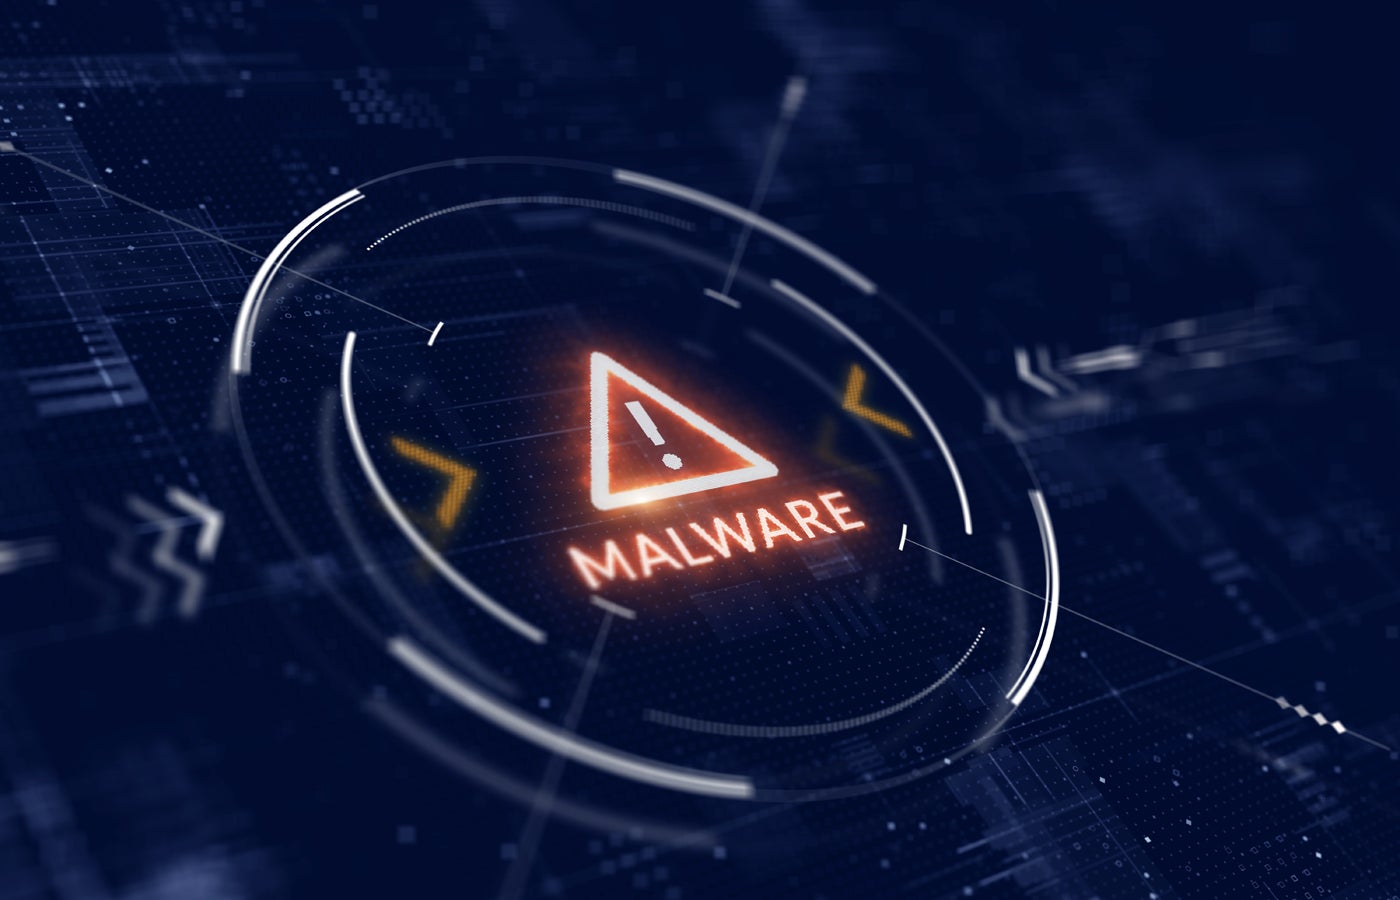 Kaspersky Study: Devices Infected With Data-Stealing Malware Increased by 7 Times Since 2020